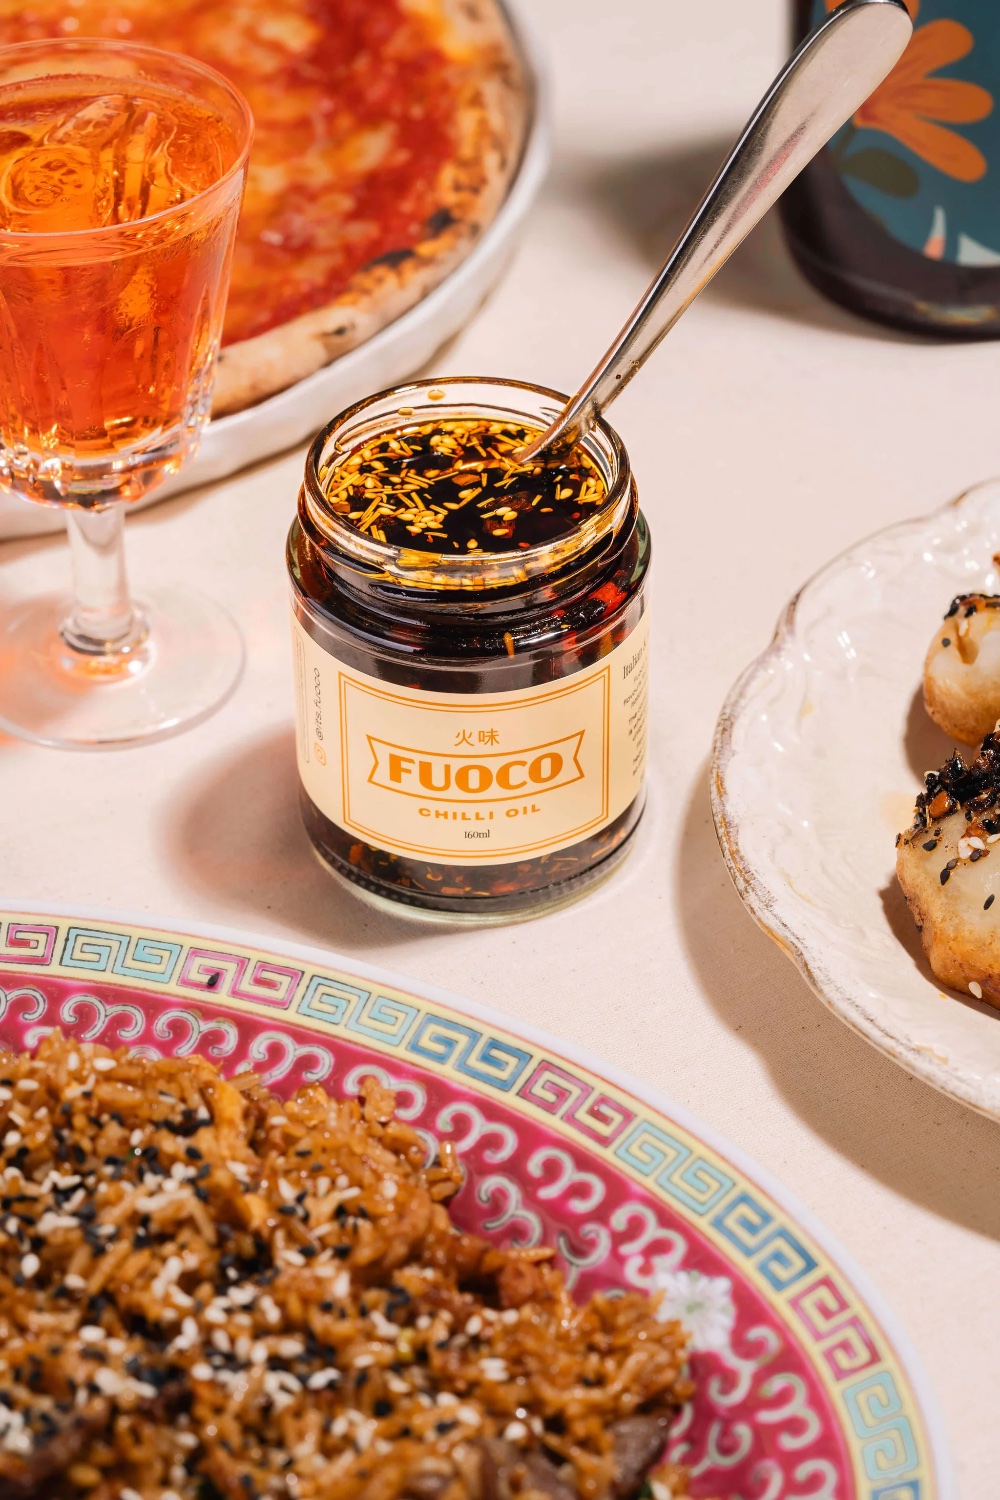 Fuoco’s Marriage of Vintage Italian Charm and Modern Elegance in a Jar